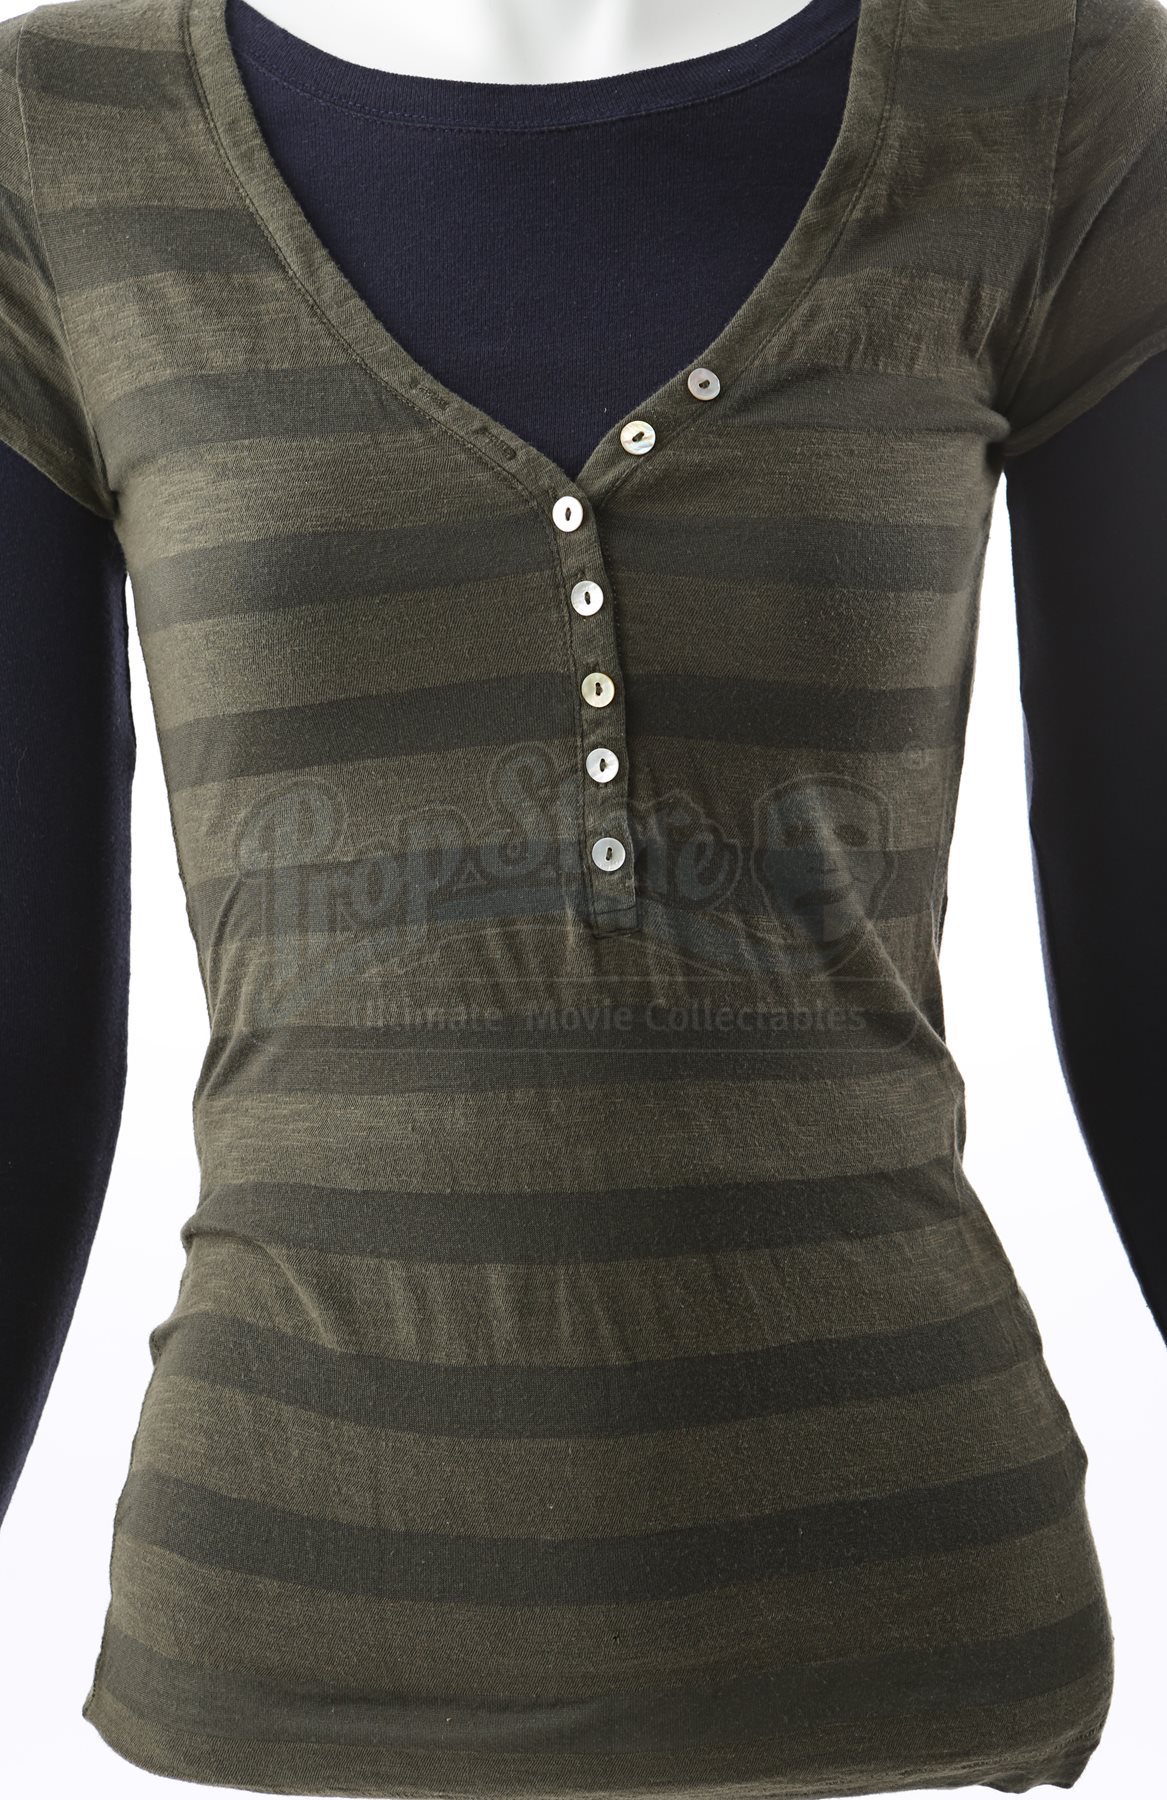 Bella Swan’s Cliff Jump Shirts - Current price: $350